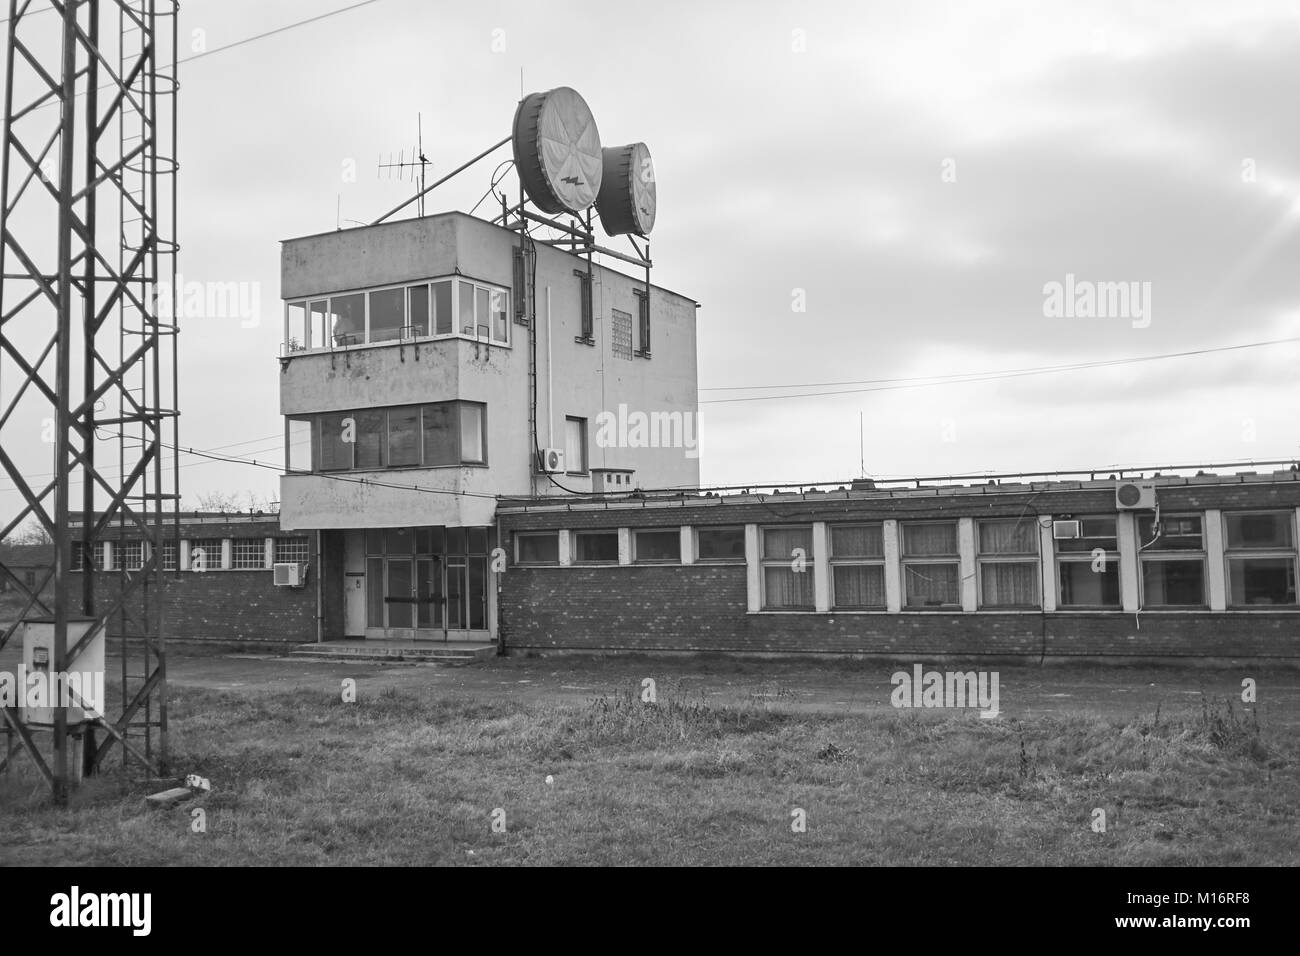 A soviet era communications station next to the rail lines in rural Hungary with two workers in the window Stock Photo